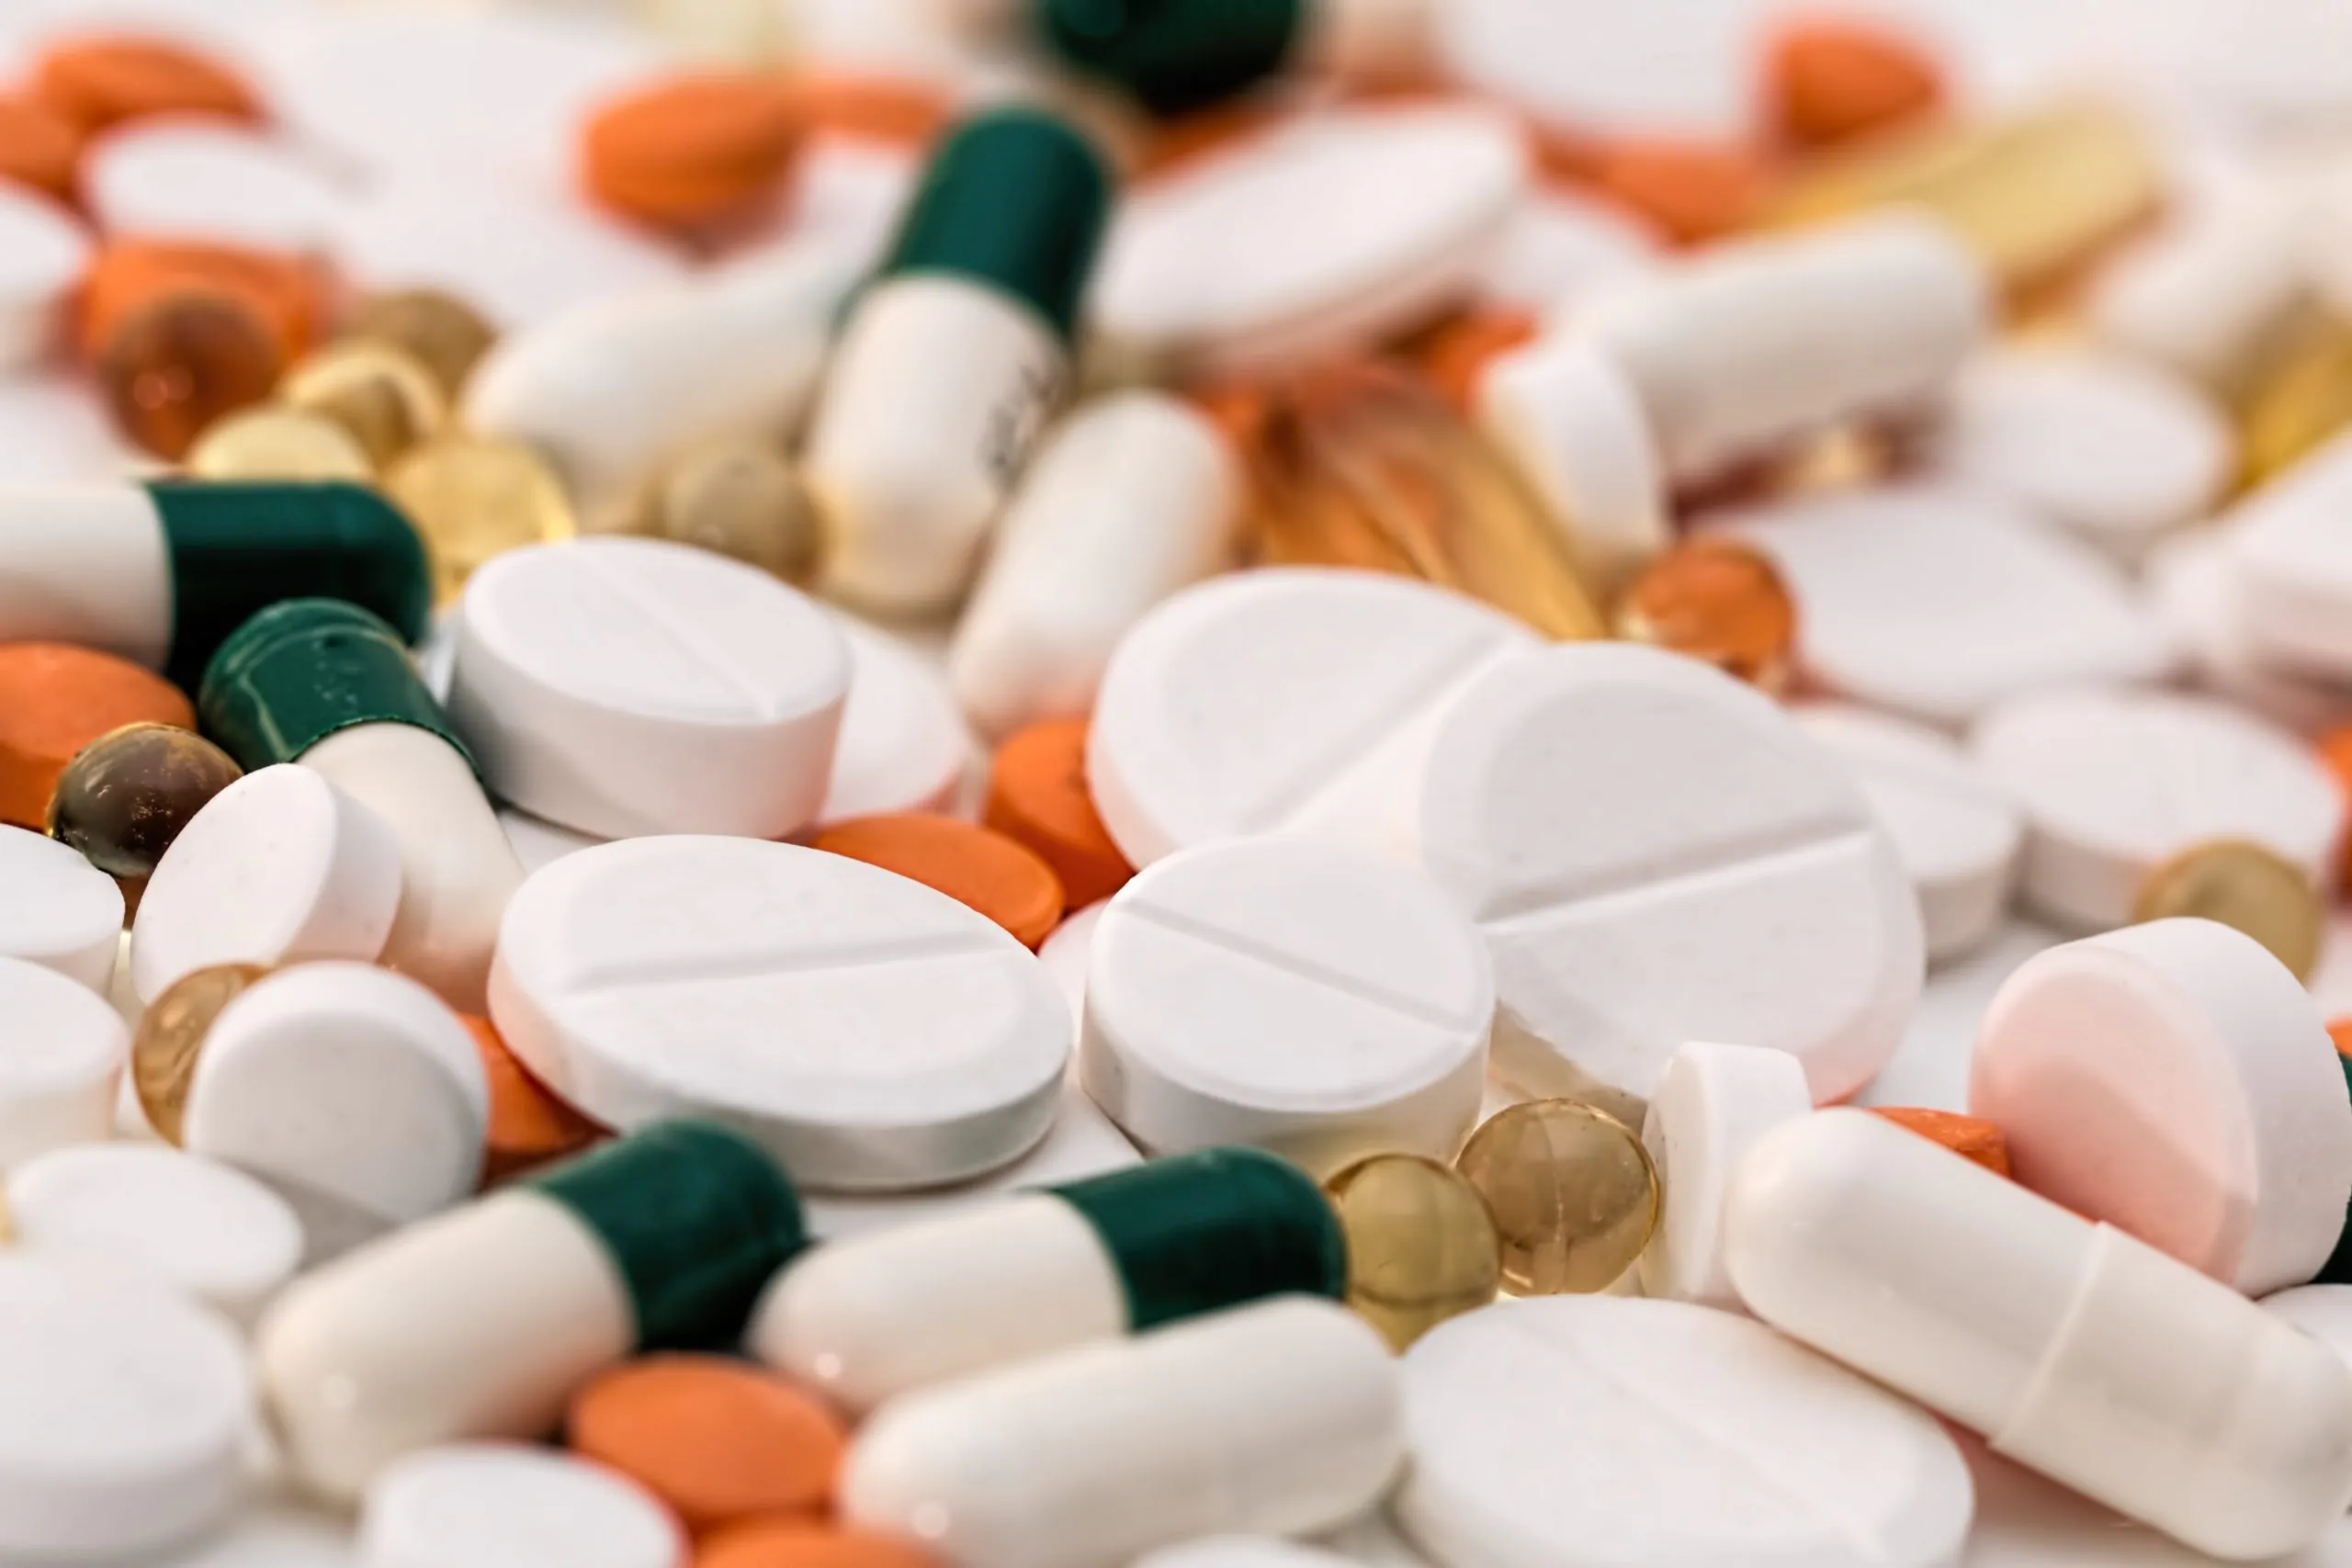 Marketing in the Pharmaceutical Industry – Vision 2025